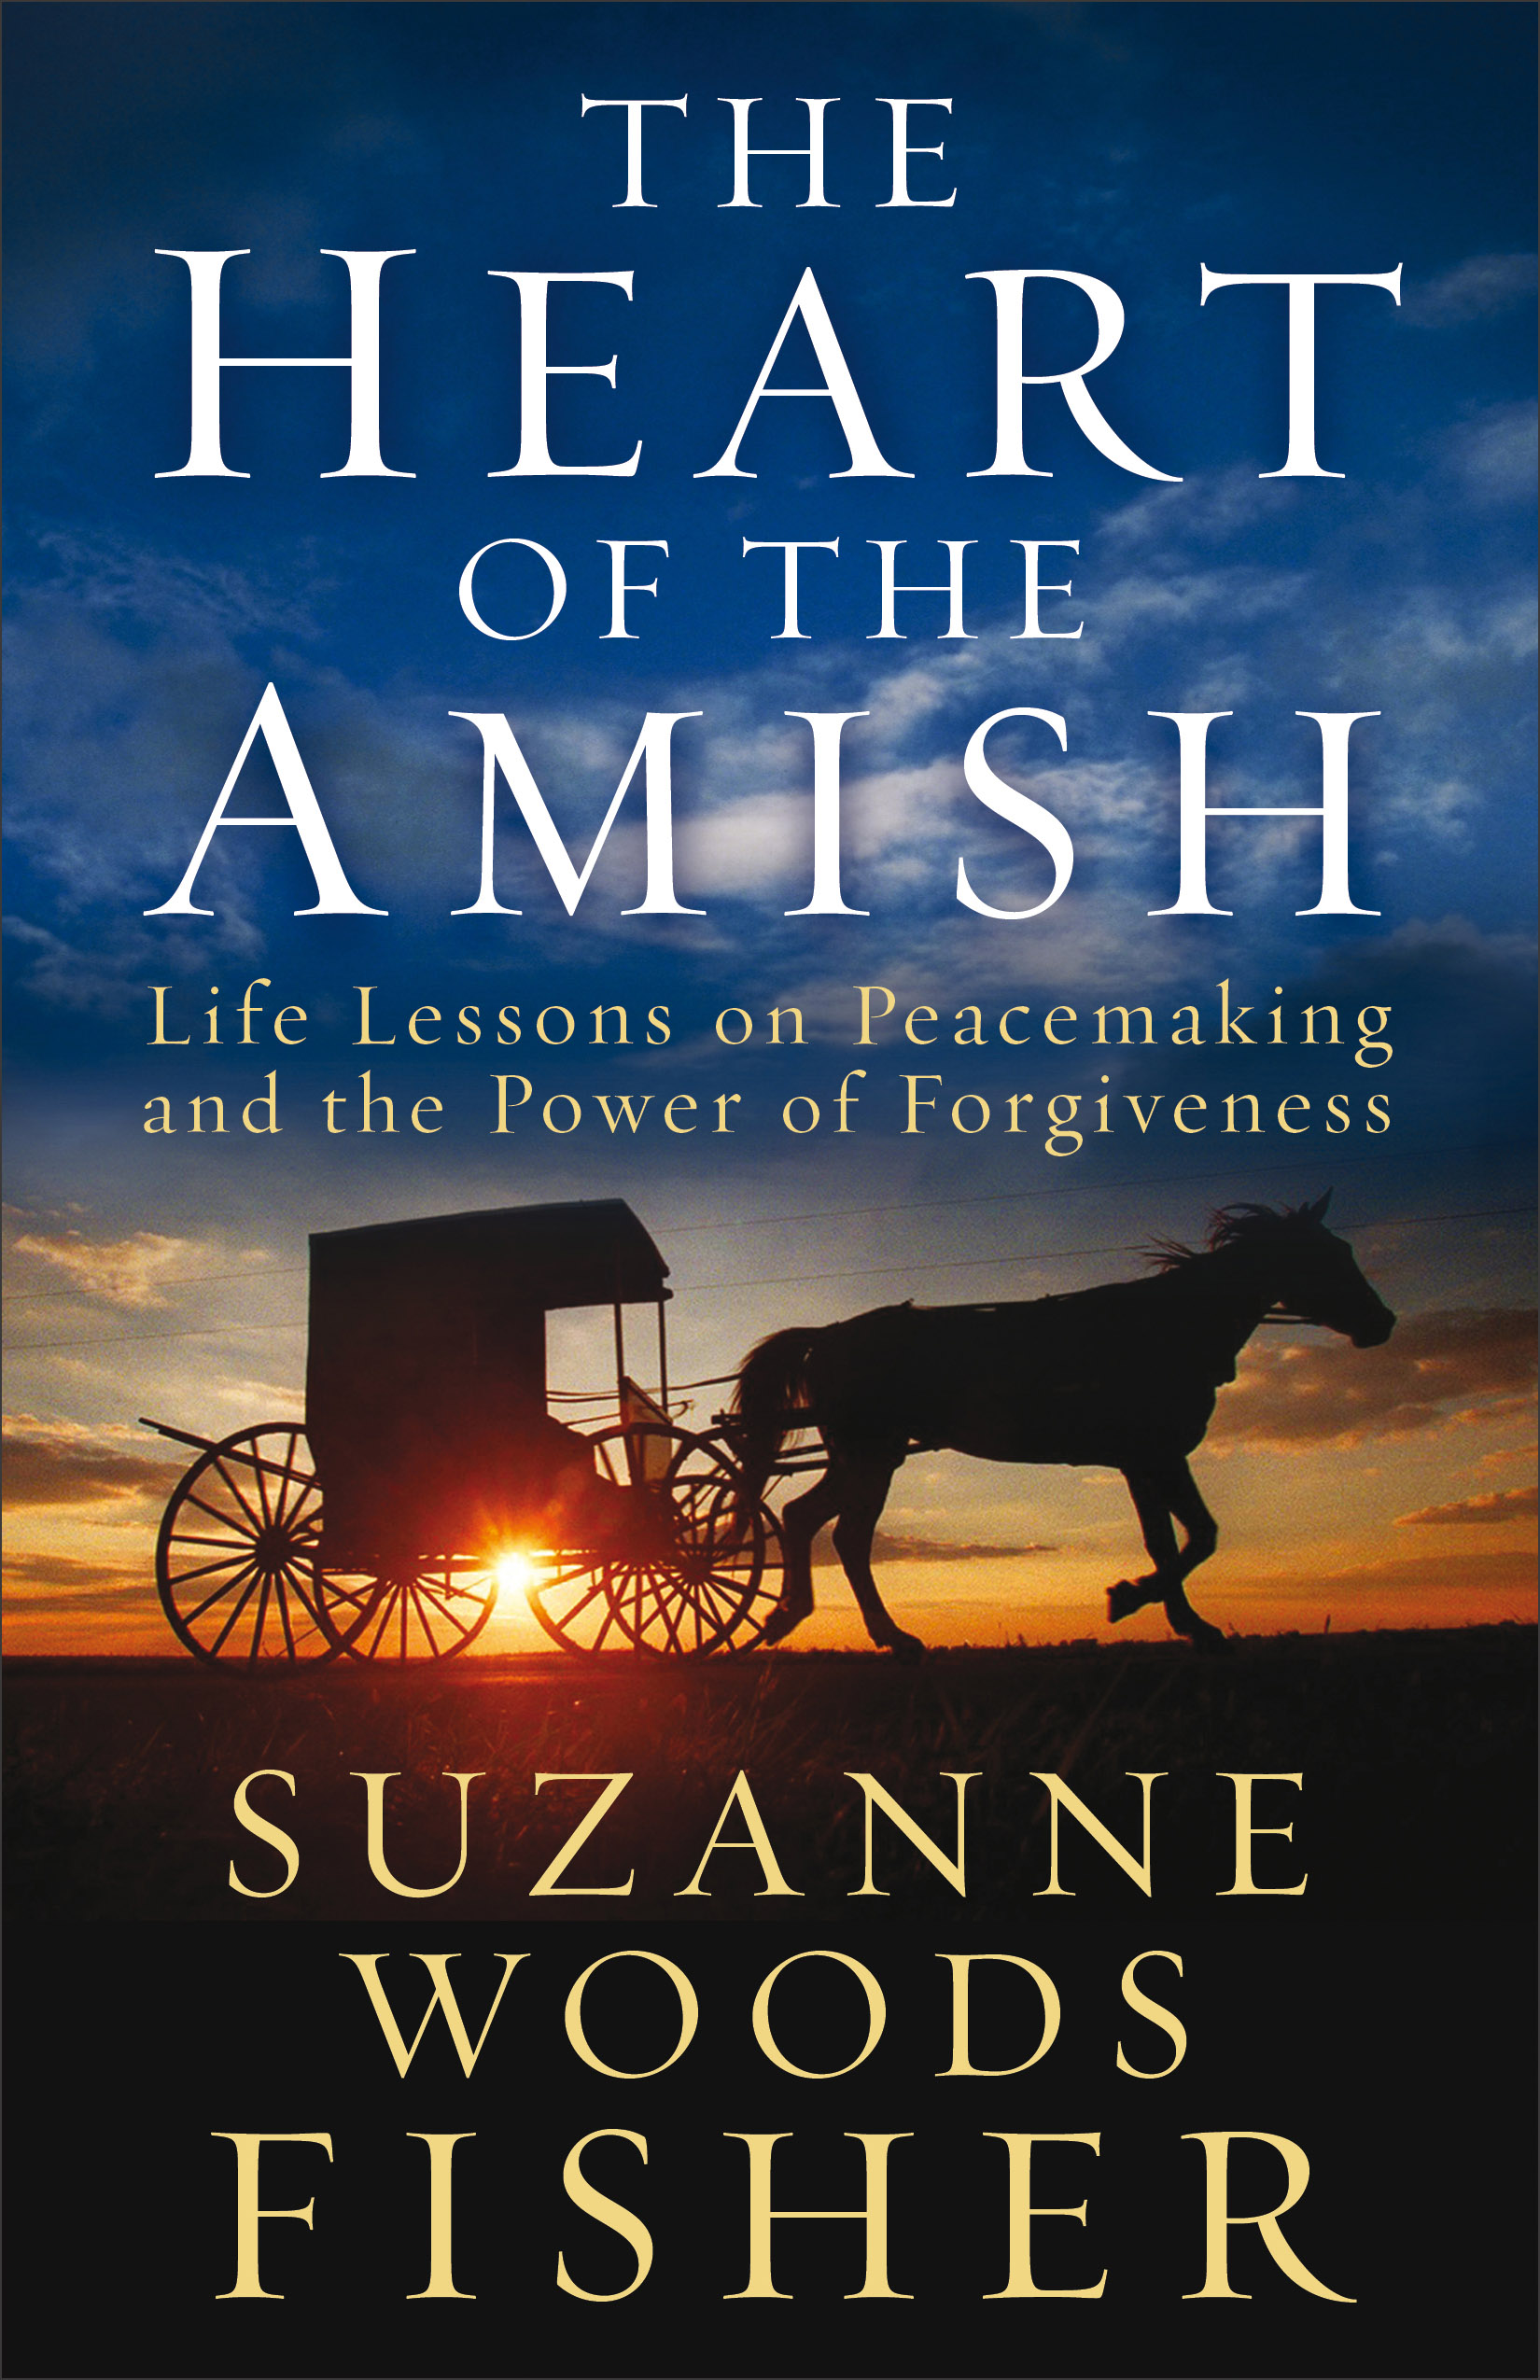 Image de couverture de The Heart of the Amish [electronic resource] : Life Lessons on Peacemaking and the Power of Forgiveness